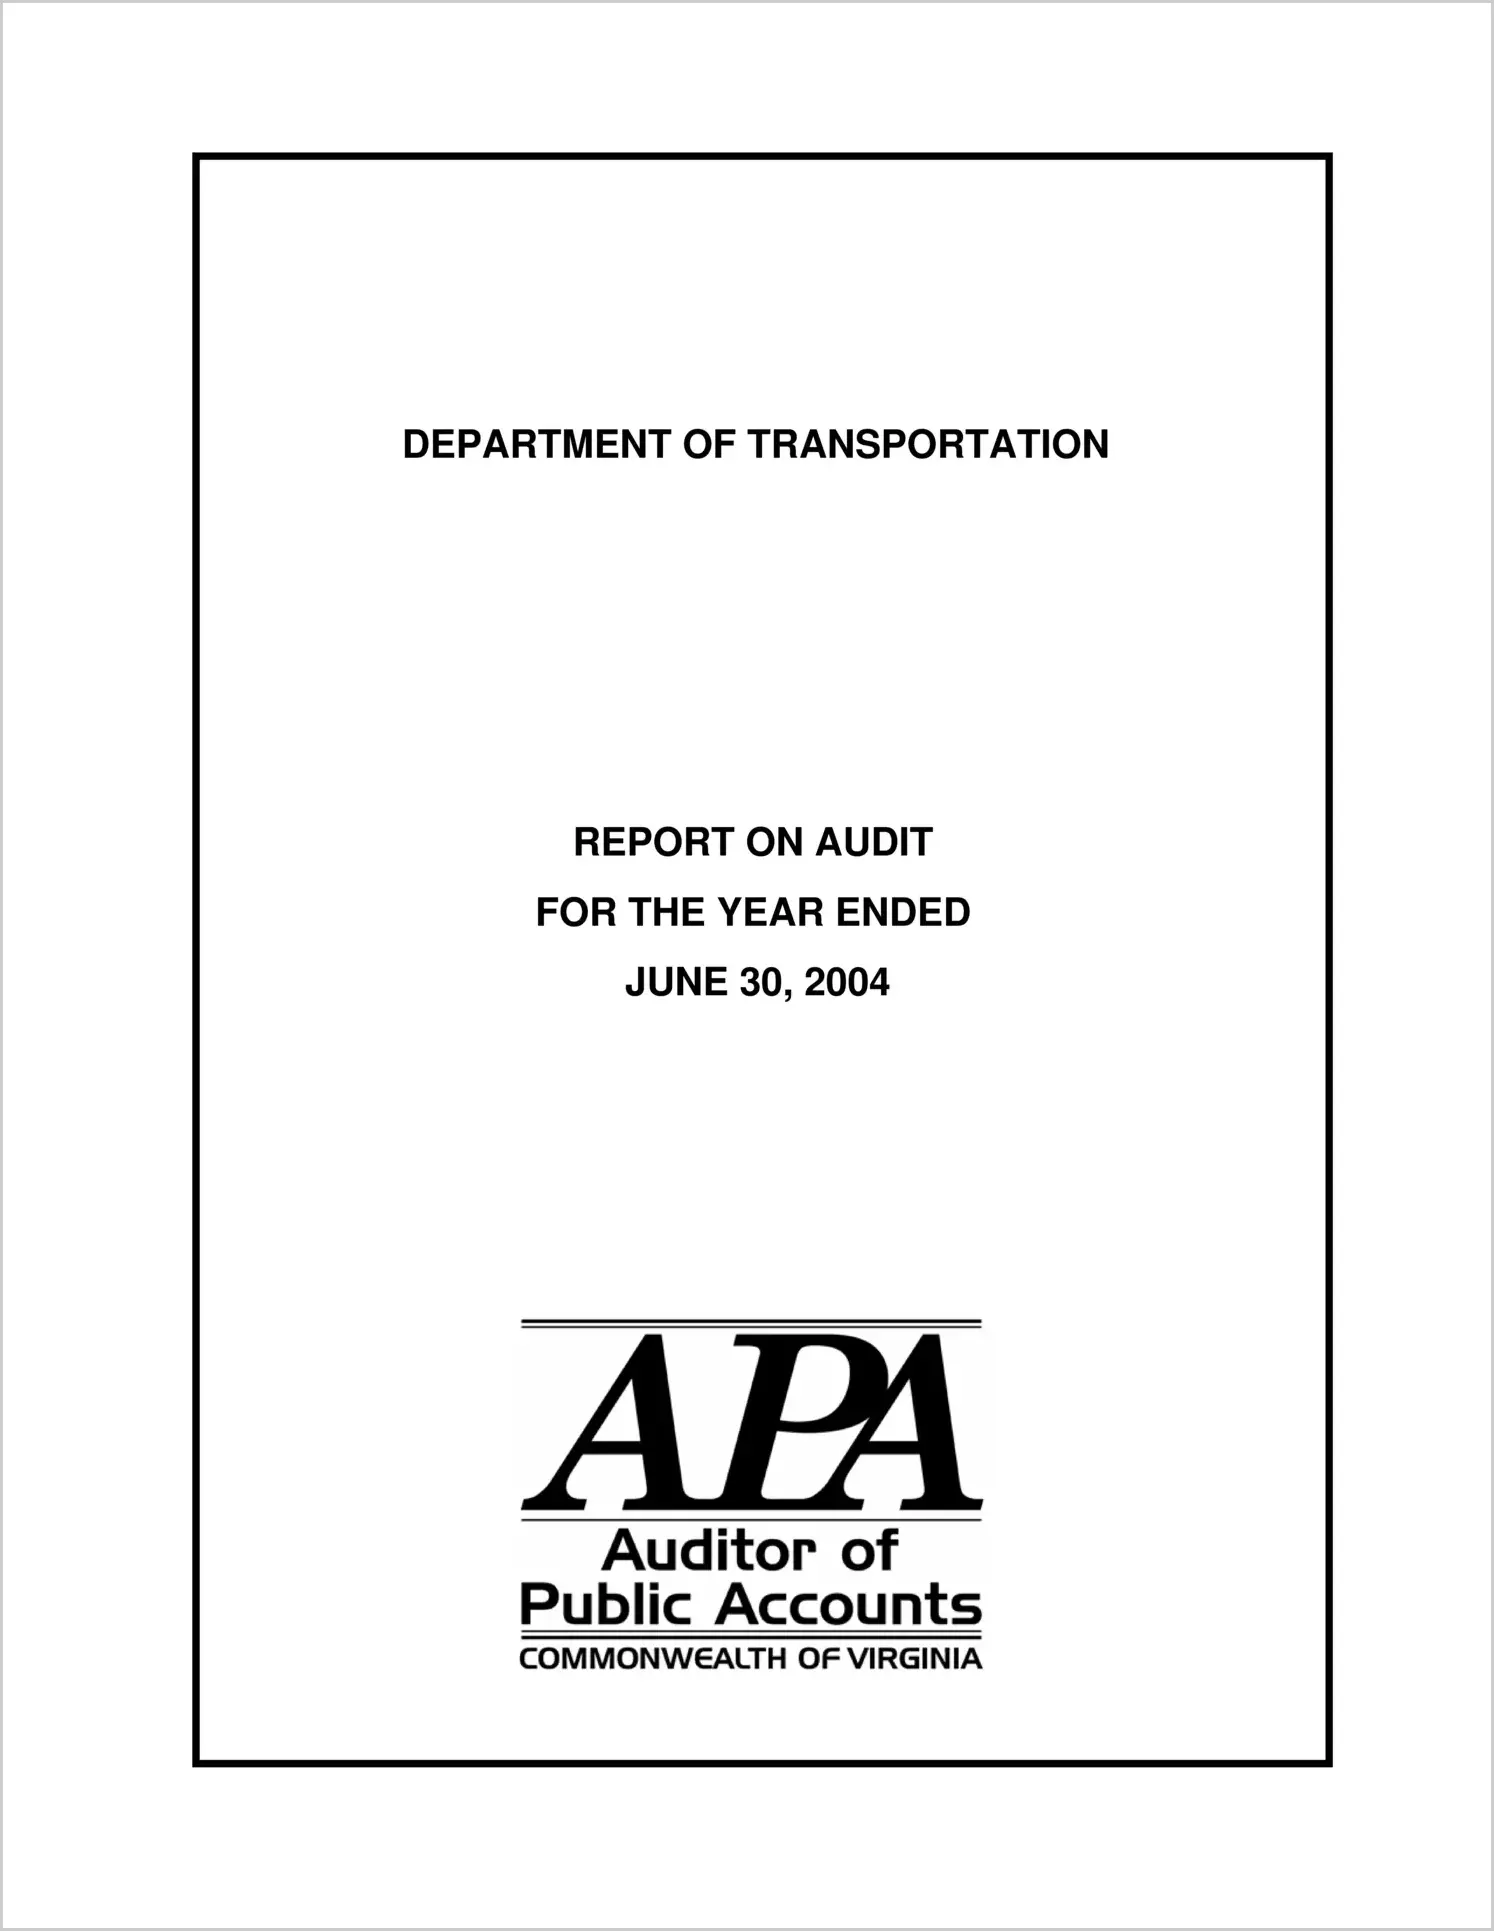 Department of Transportation for the year ended June 30, 2004